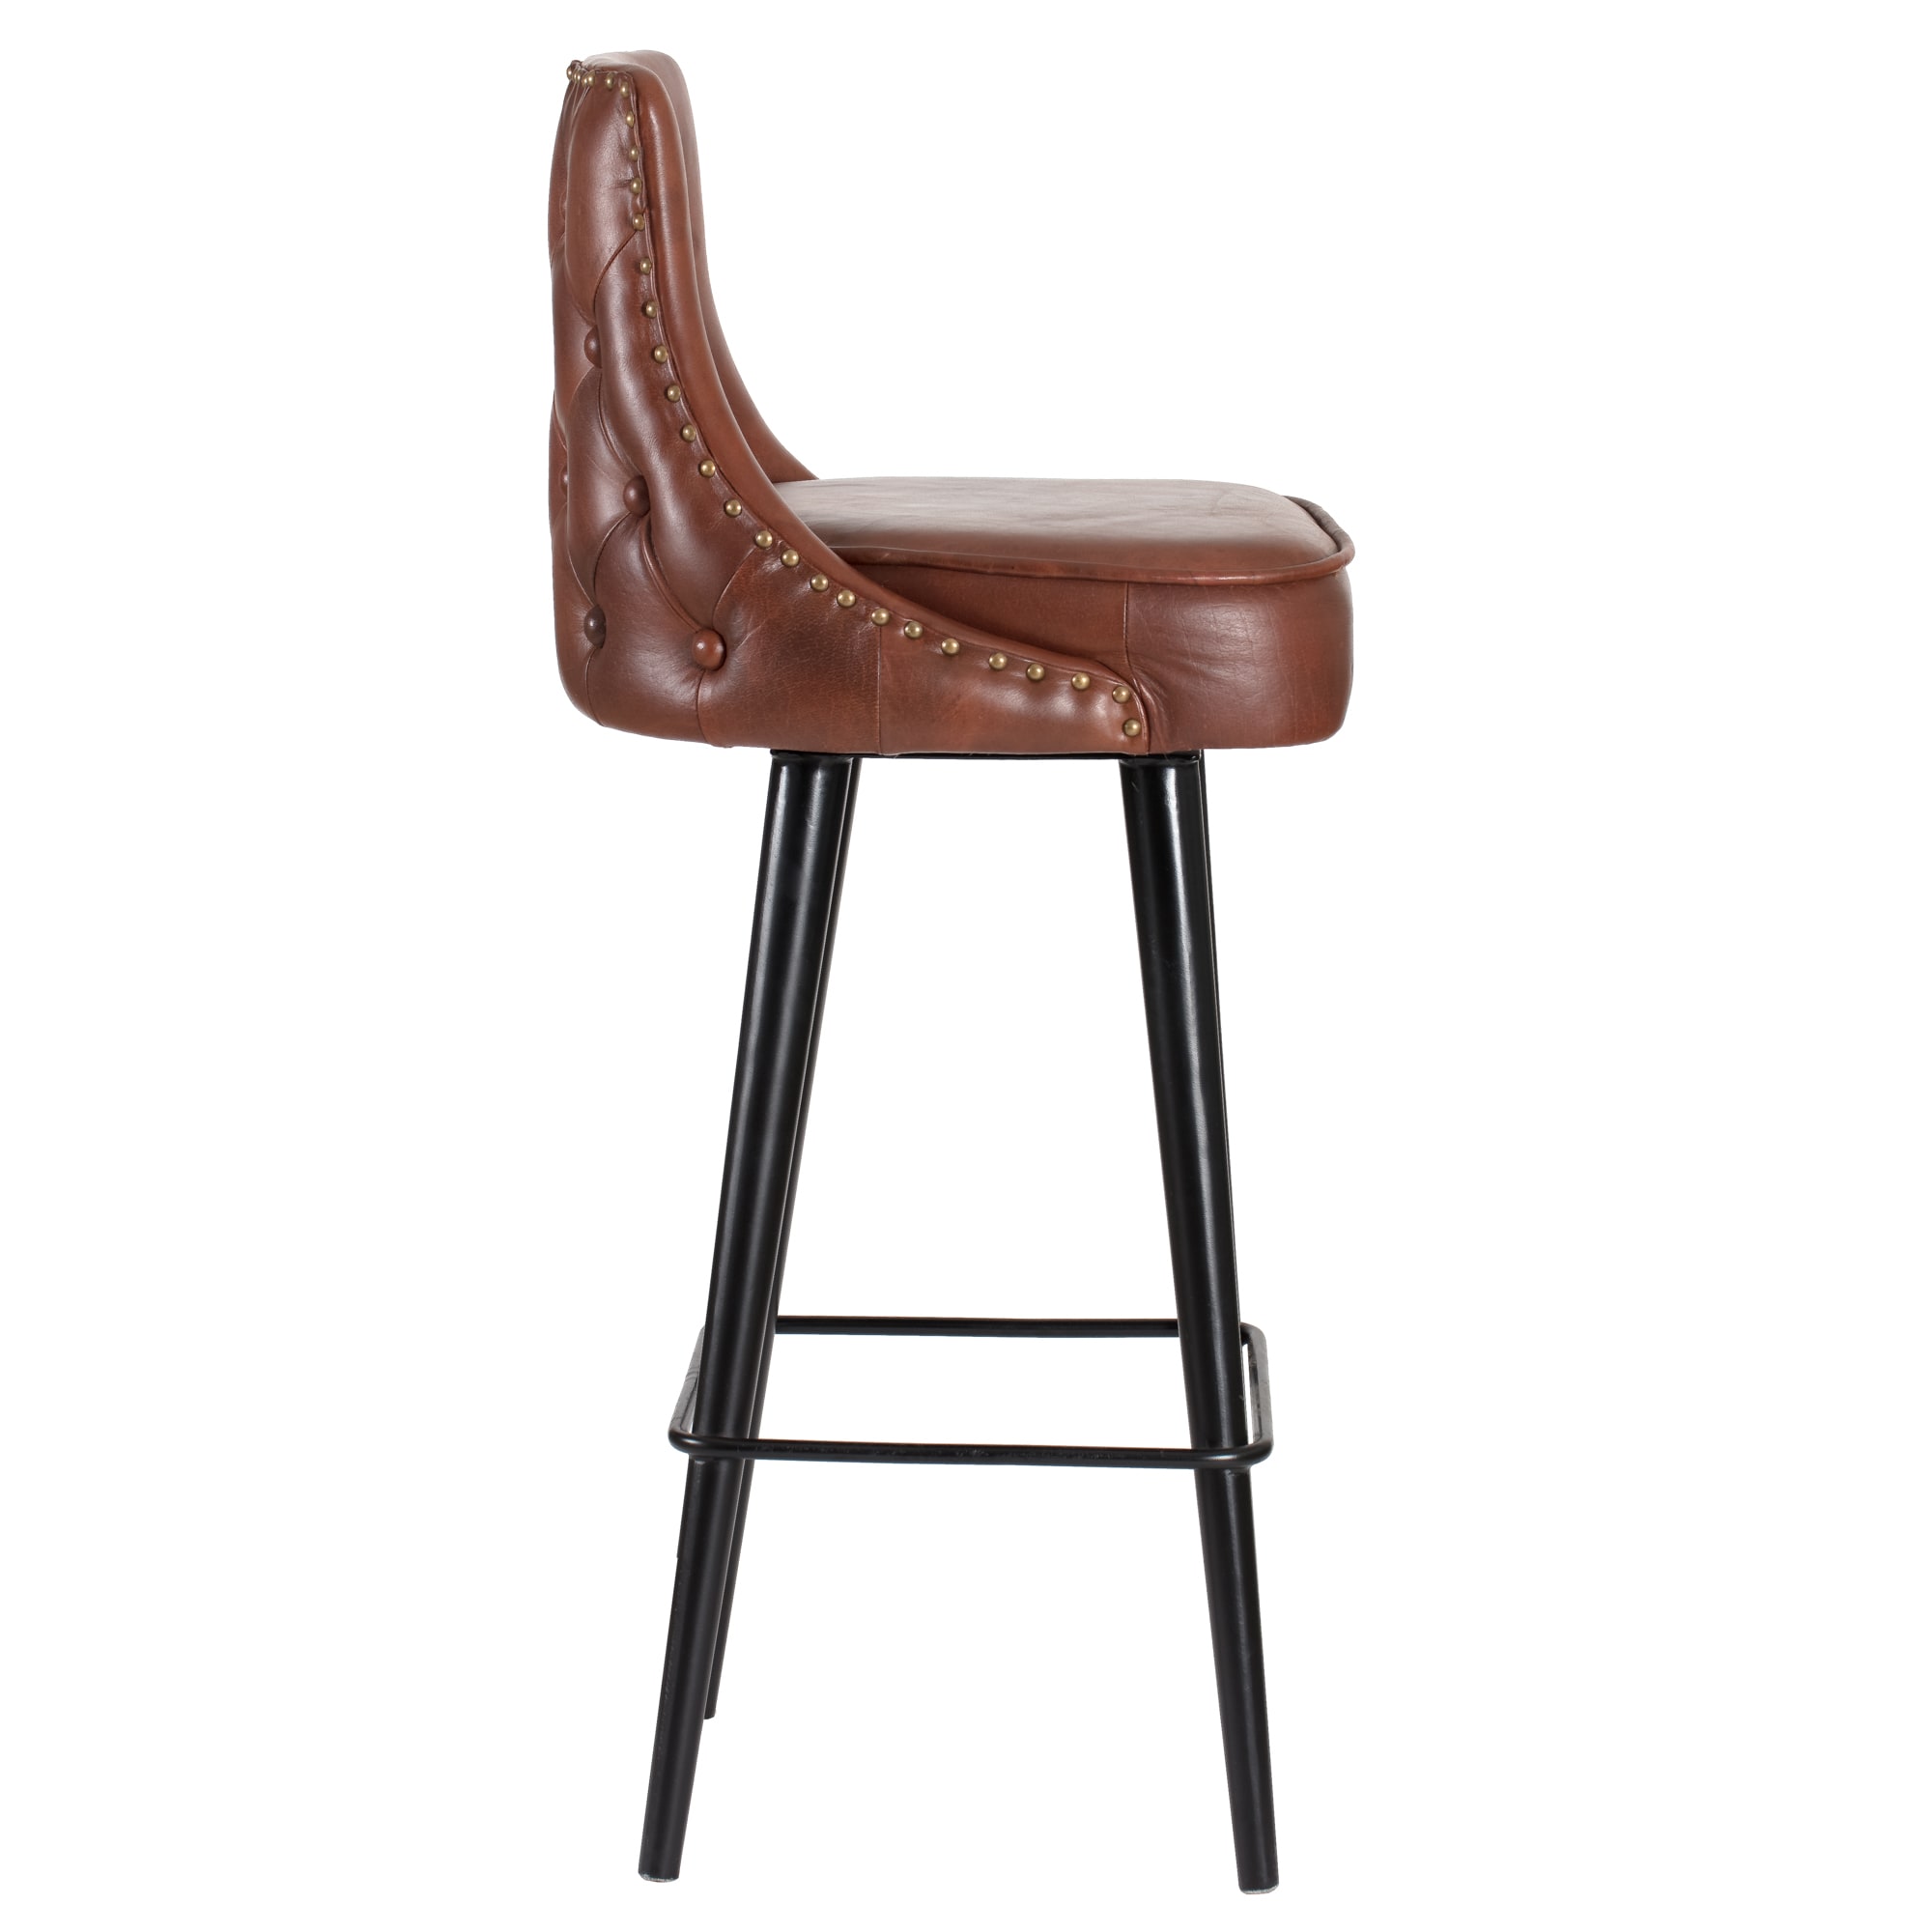 Genuine Leather Bar Stools At Com, Real Leather Bar Stools Swivel